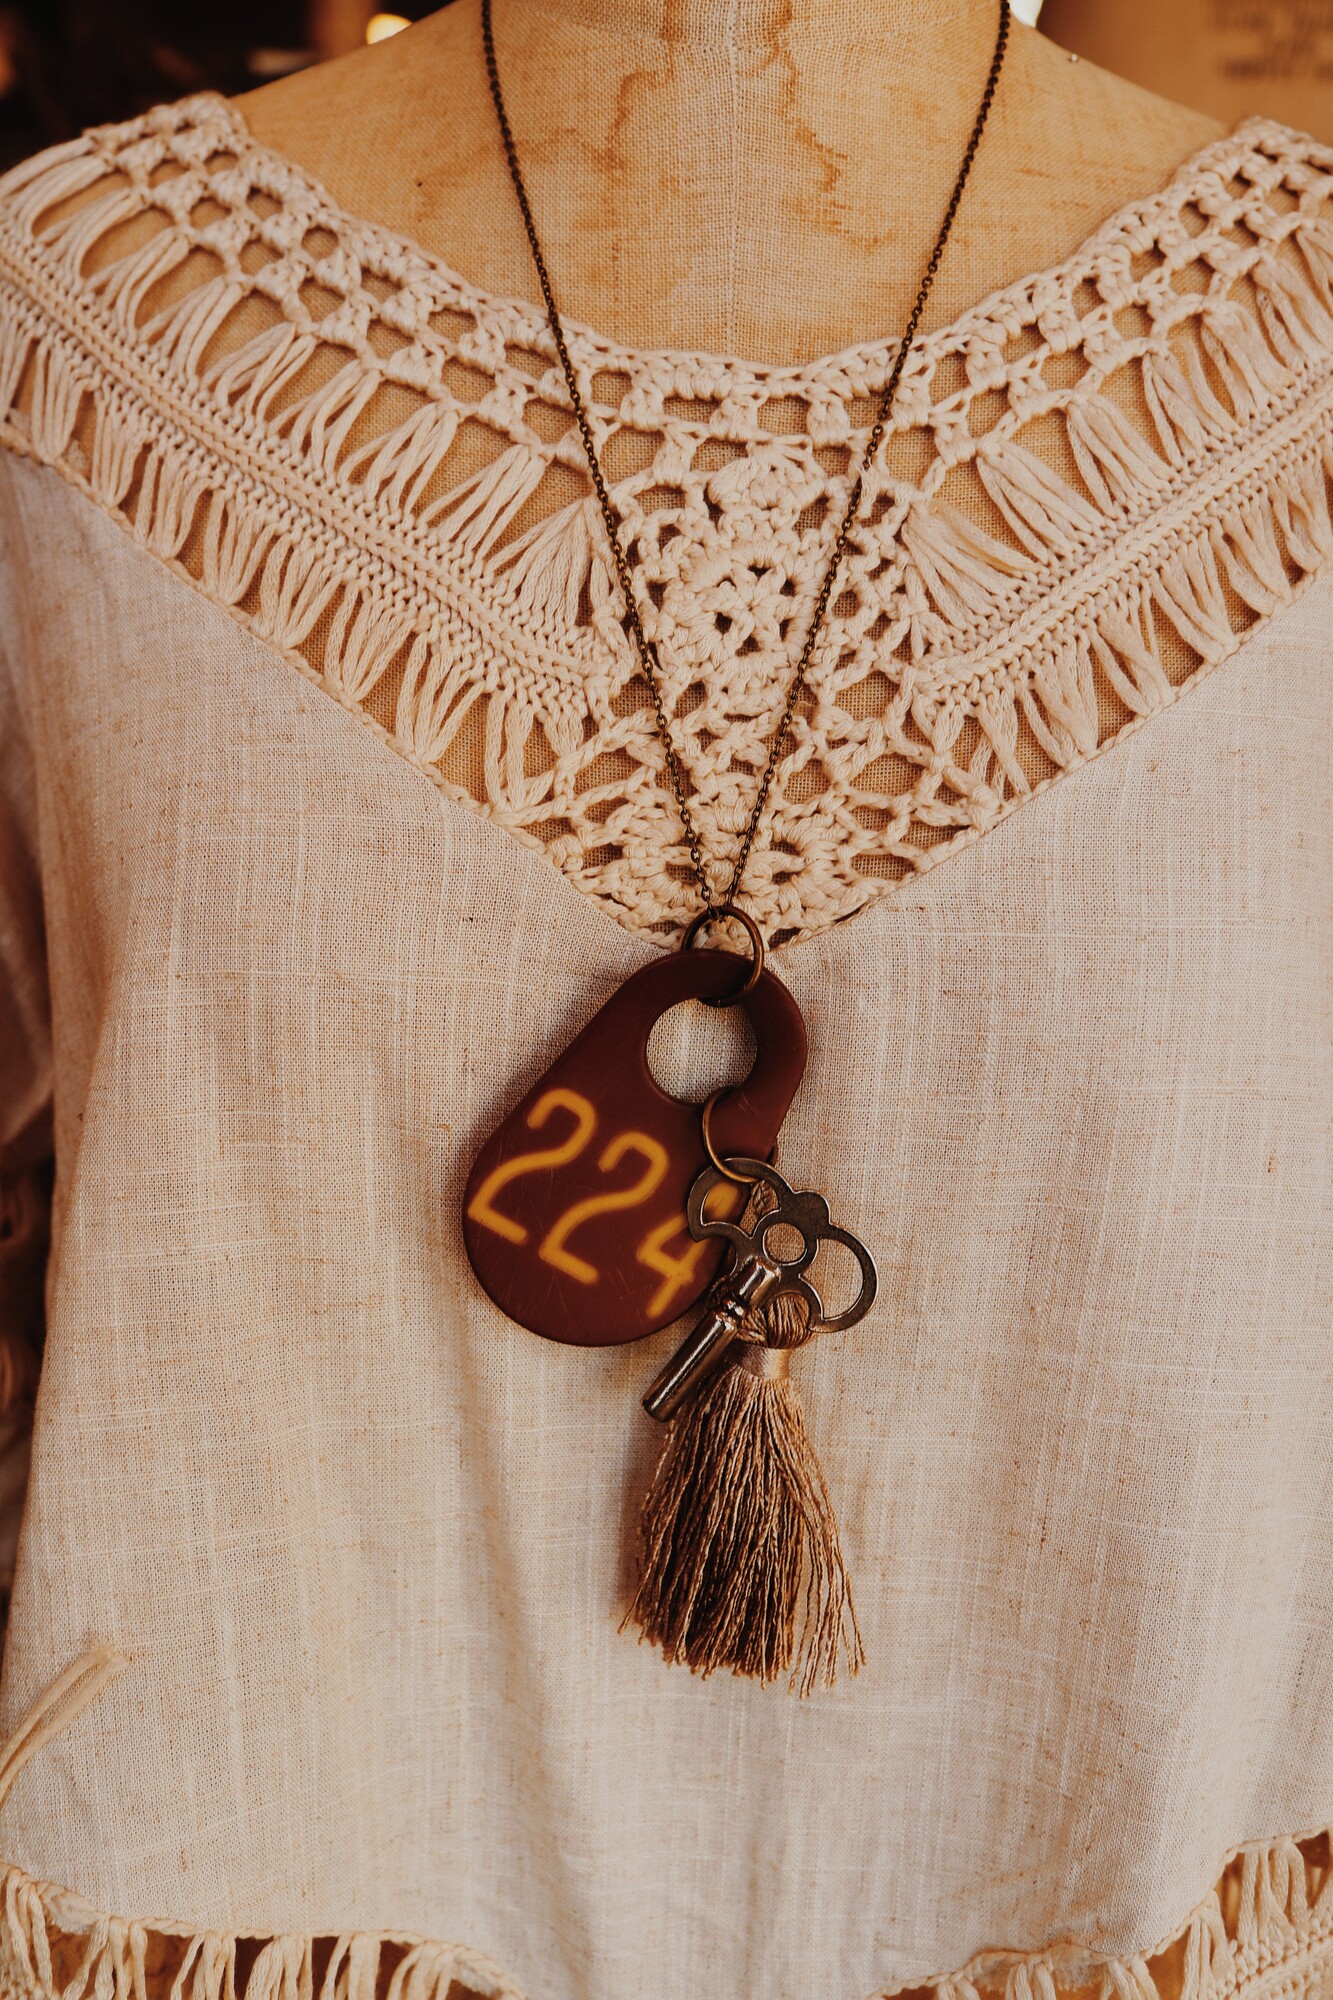 This one of a kind, handmade necklace has a cowtag with 224 on it, as well as a silver key and tassle. It hangs from a 26 inch chain.